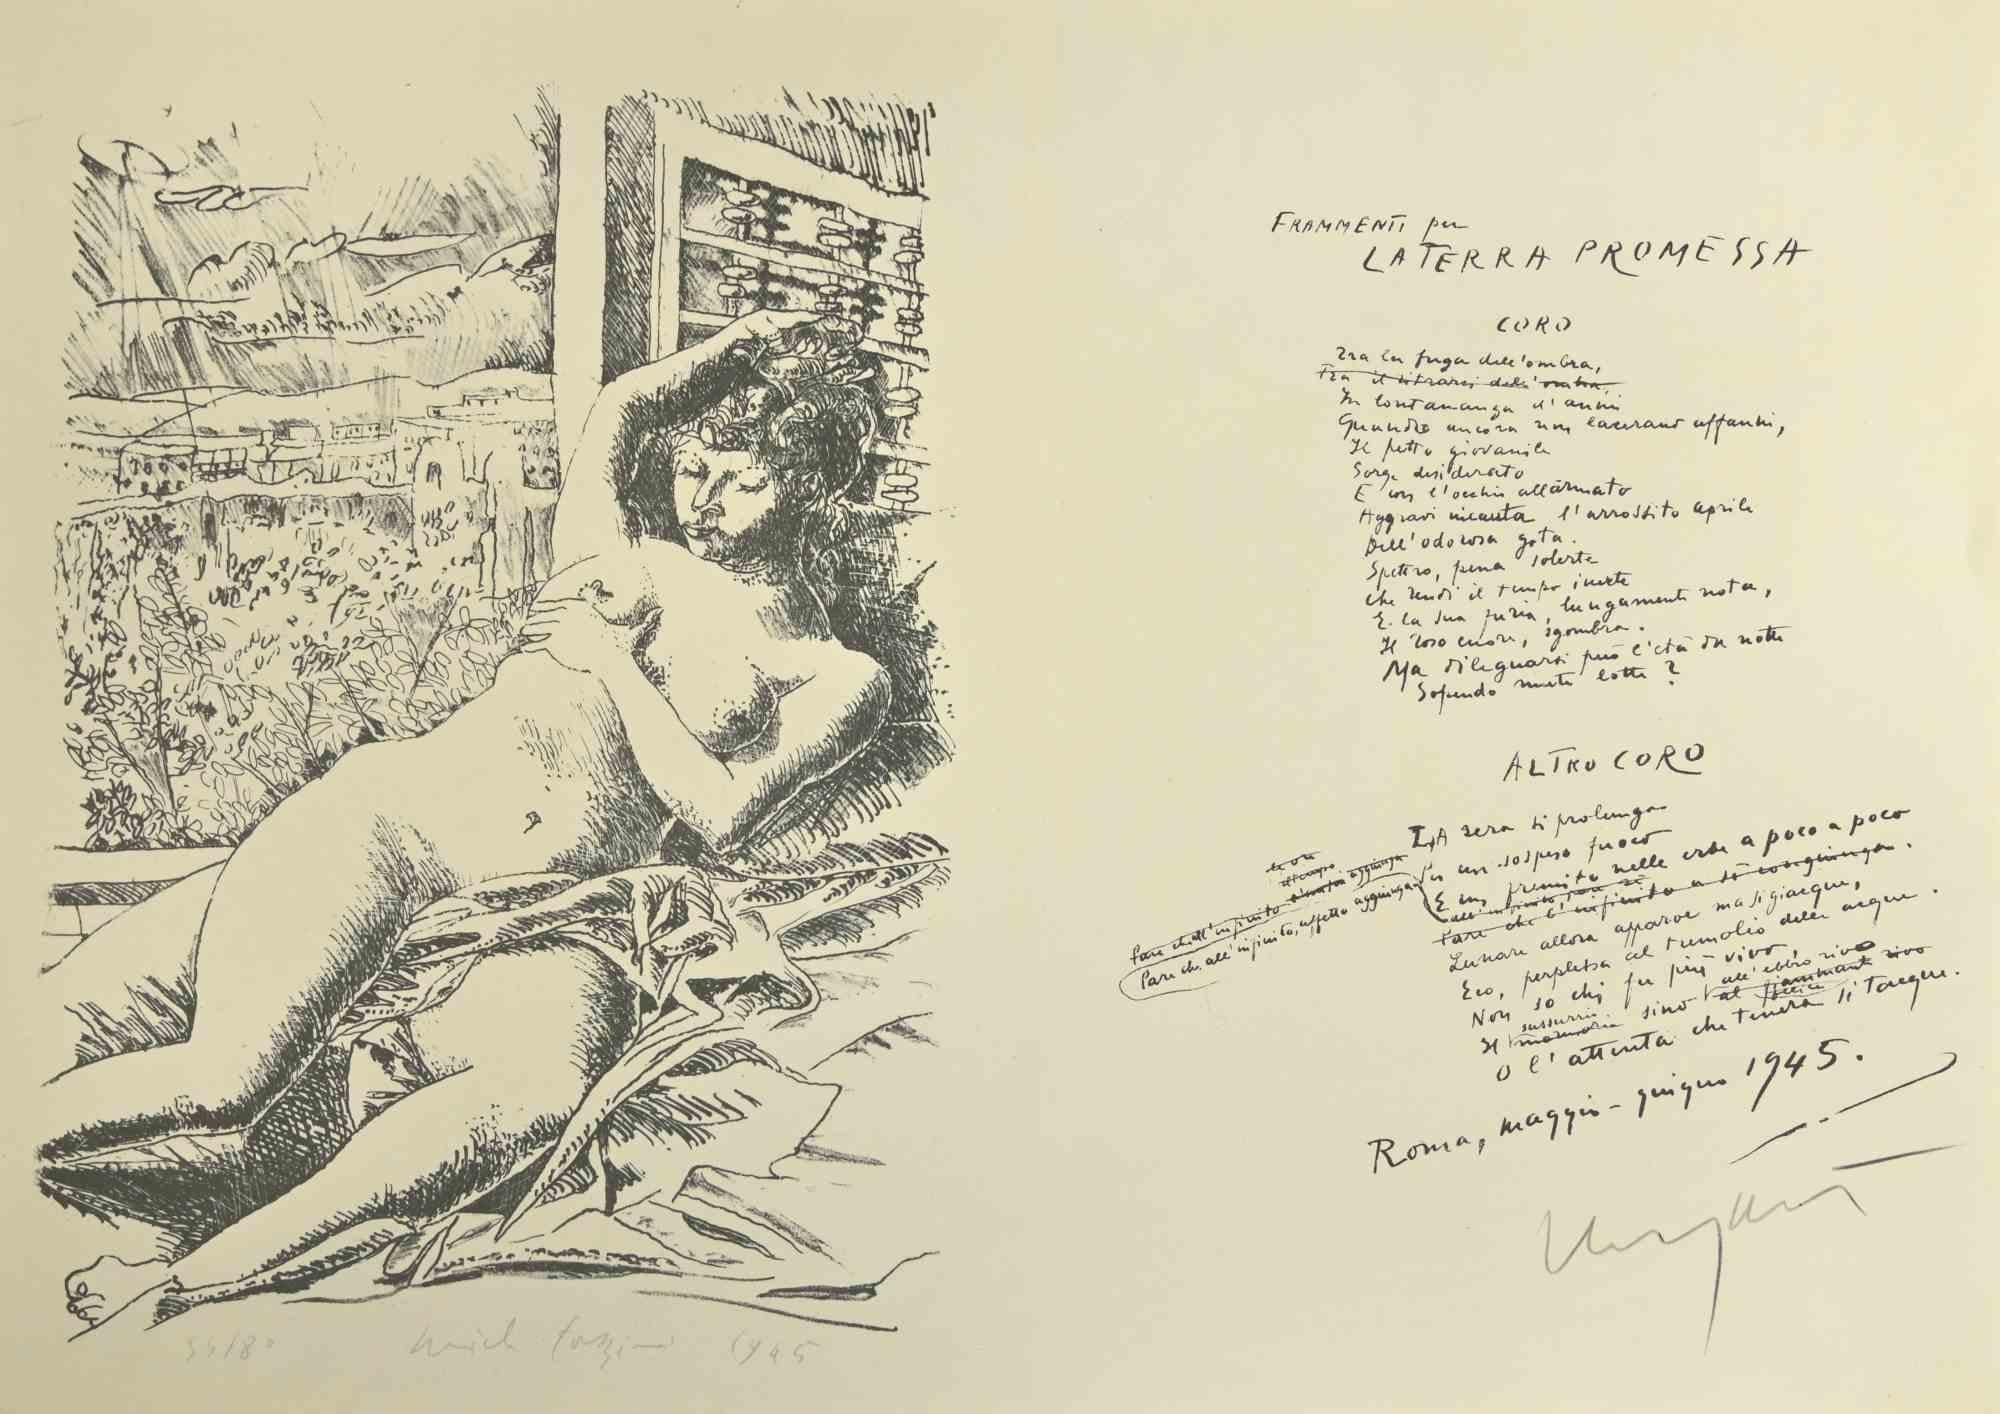 Fragments for the promised land is a modern artwork realized by Pericle Fazzini and Giuseppe Ungaretti

Black and white lithograph realized by Pericle Fazzini with a text by Giuseppe Ungaretti

Good conditions.

The text is hand signed by Giuseppe